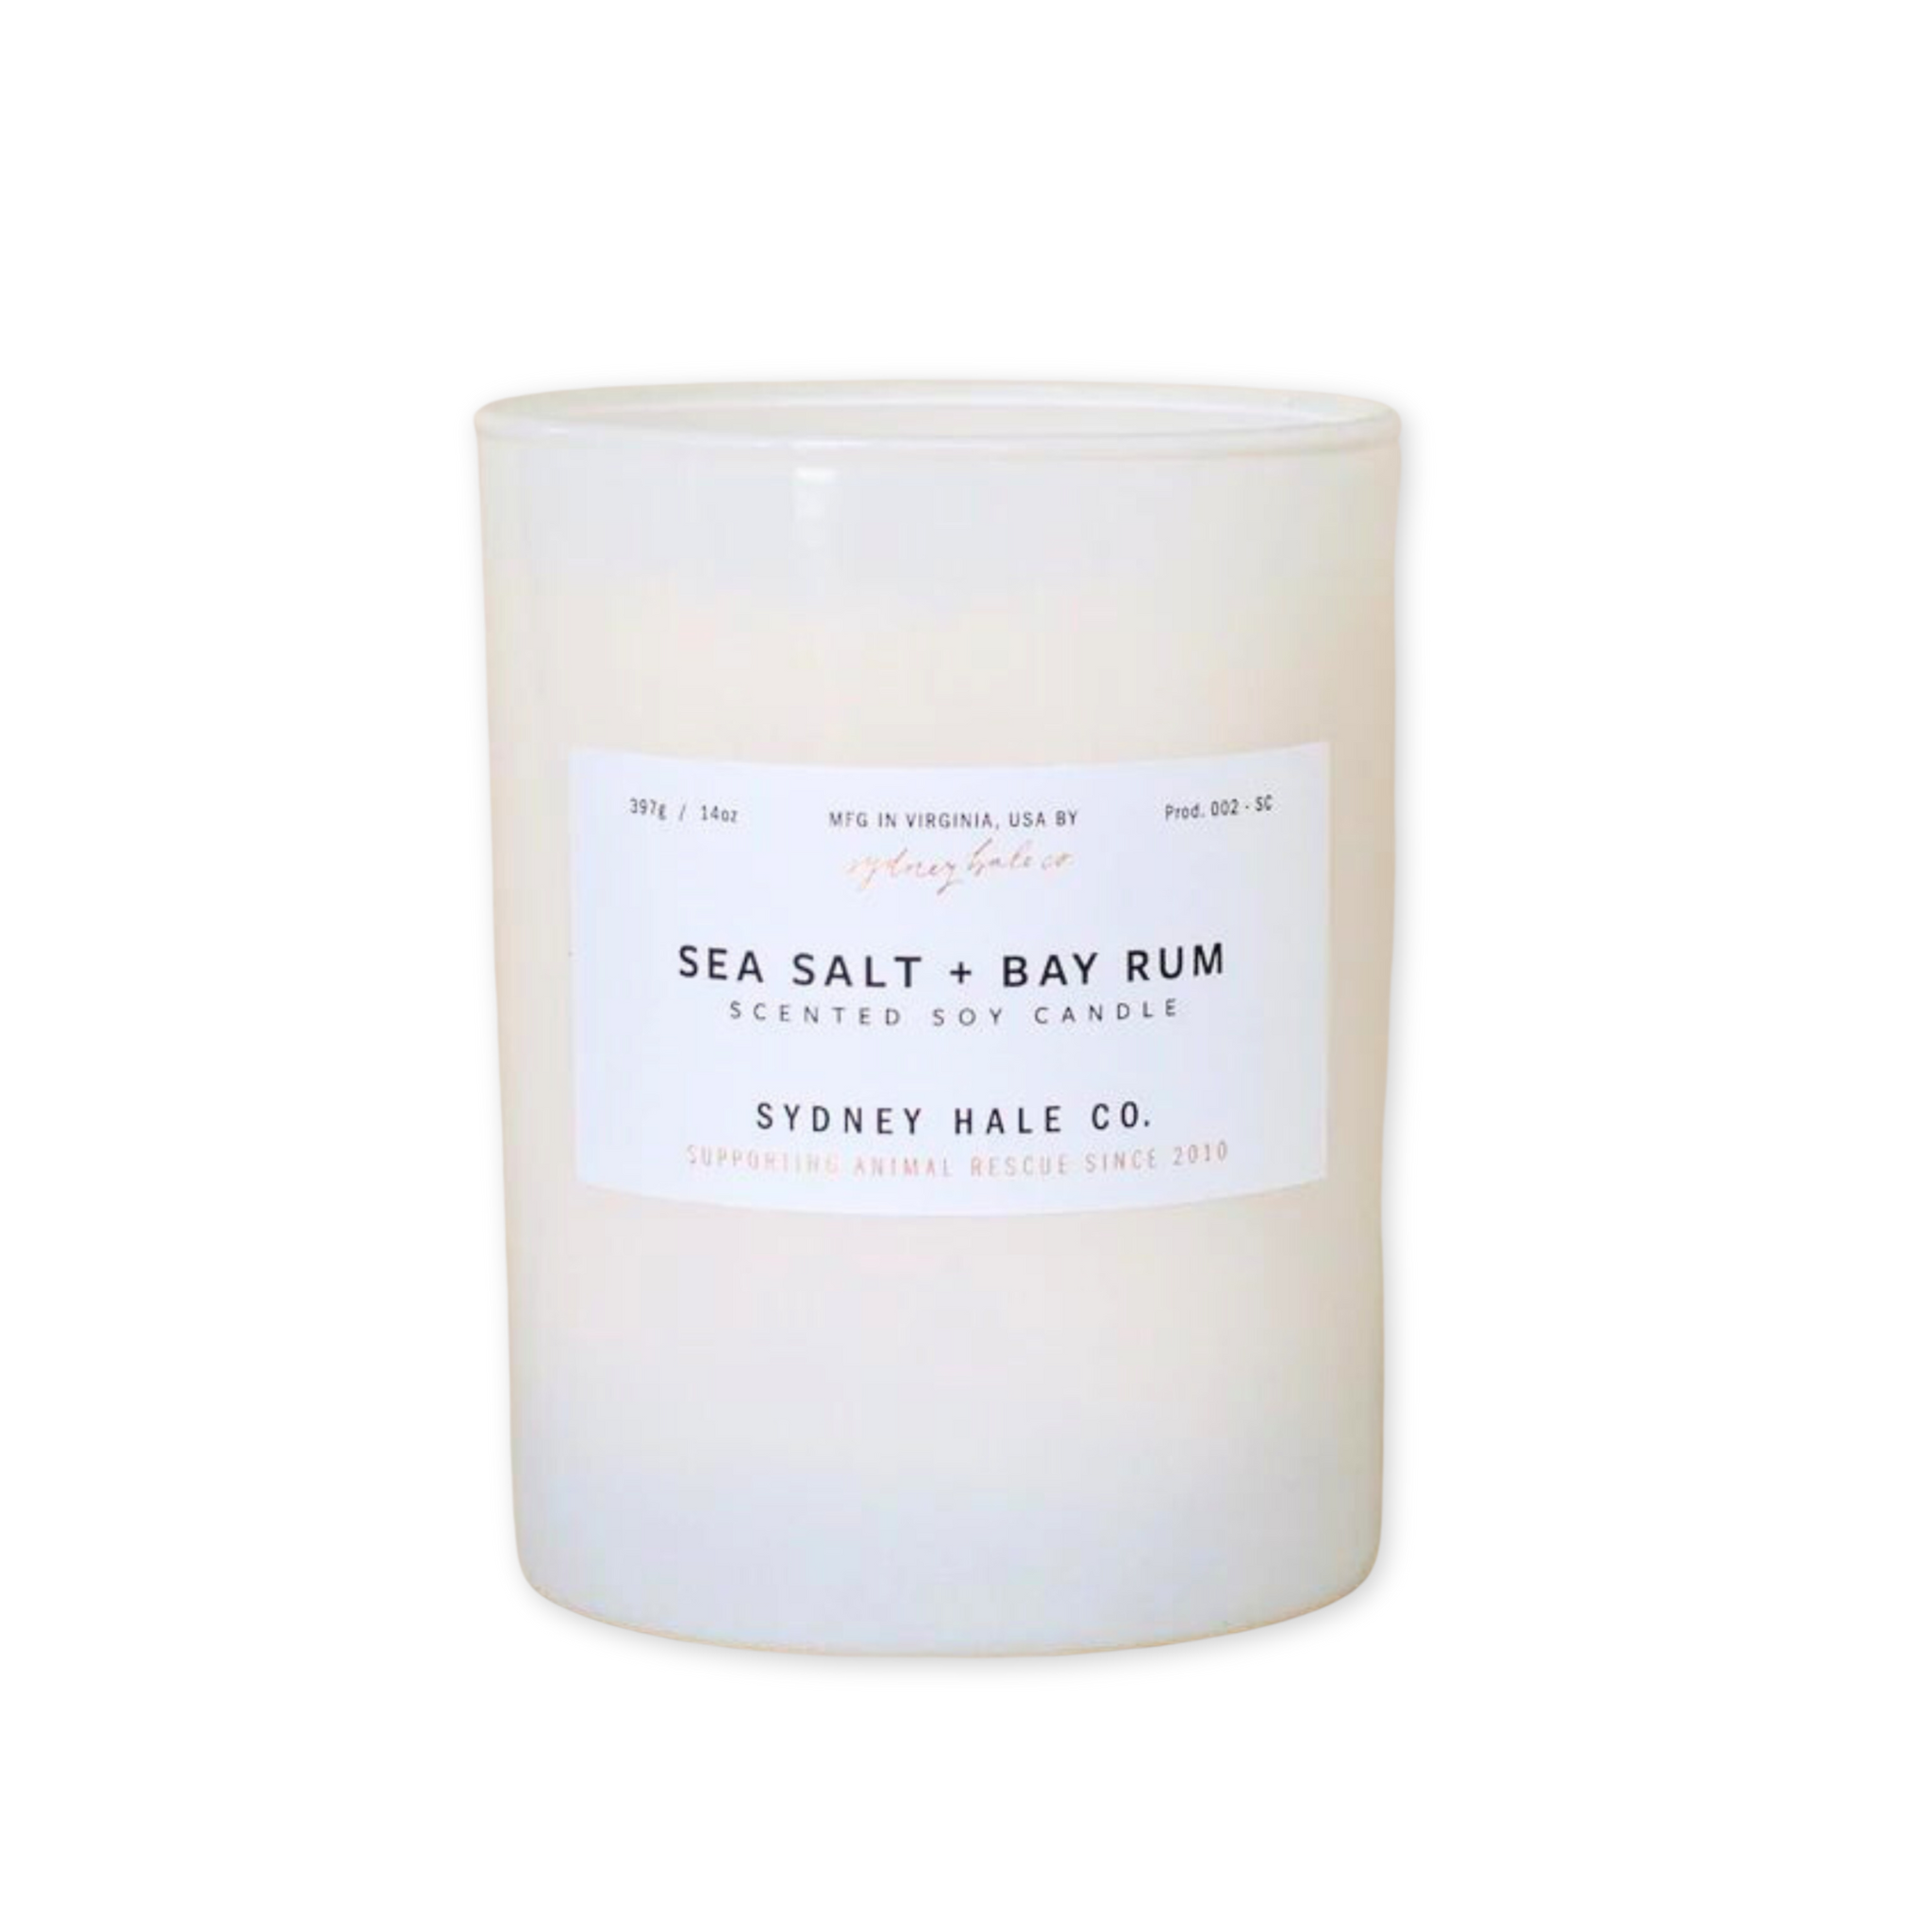 sea salt and bay rum scented candle